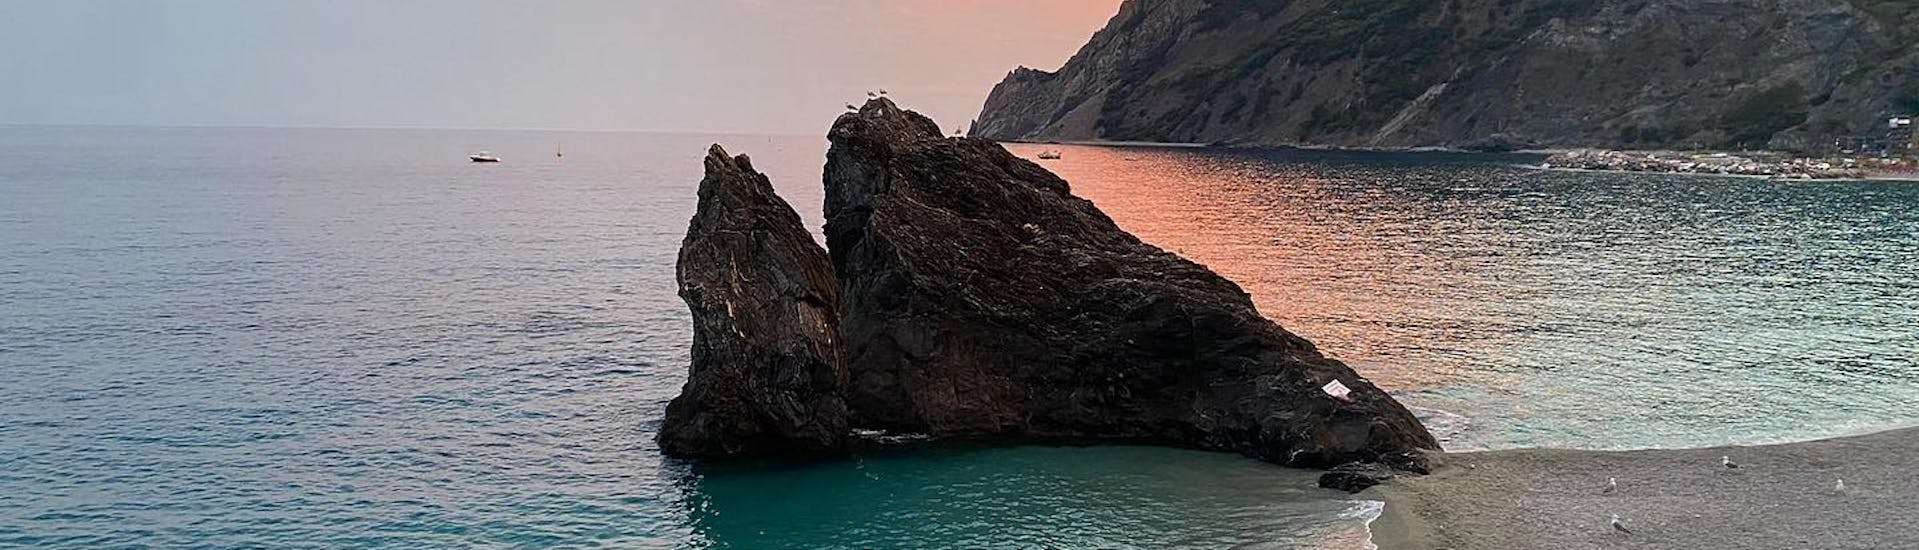 The rock of Monterosso is one of the many highlights of this Sunset Boat Trip along Cinque Terre with Aperitif with Sea Breeze Boat Tours Levanto.